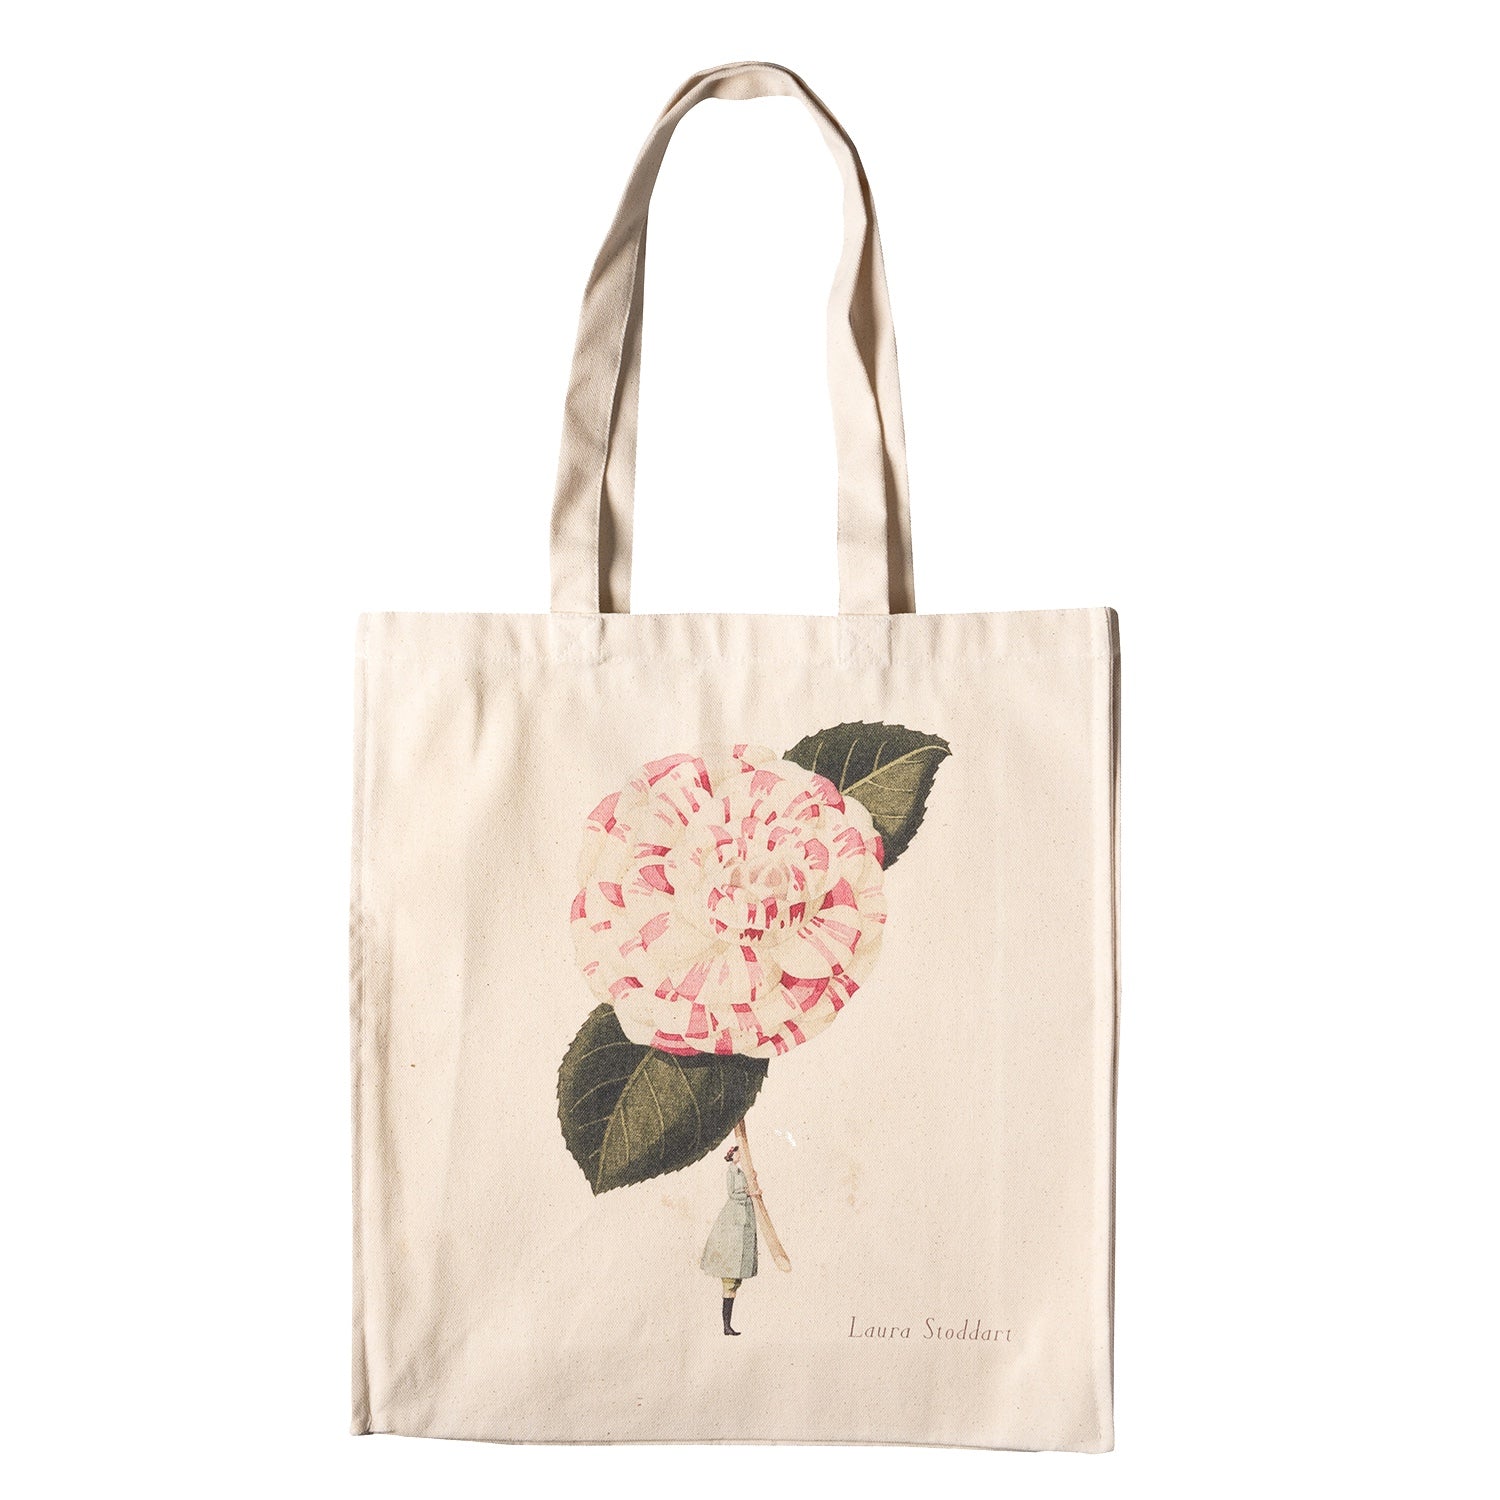 The Camelia Heavyweight Canvas Tote Bag is light tan featuring a stylized illustration of a woman holding a gigantic white and pink camelia bloom by the stem.